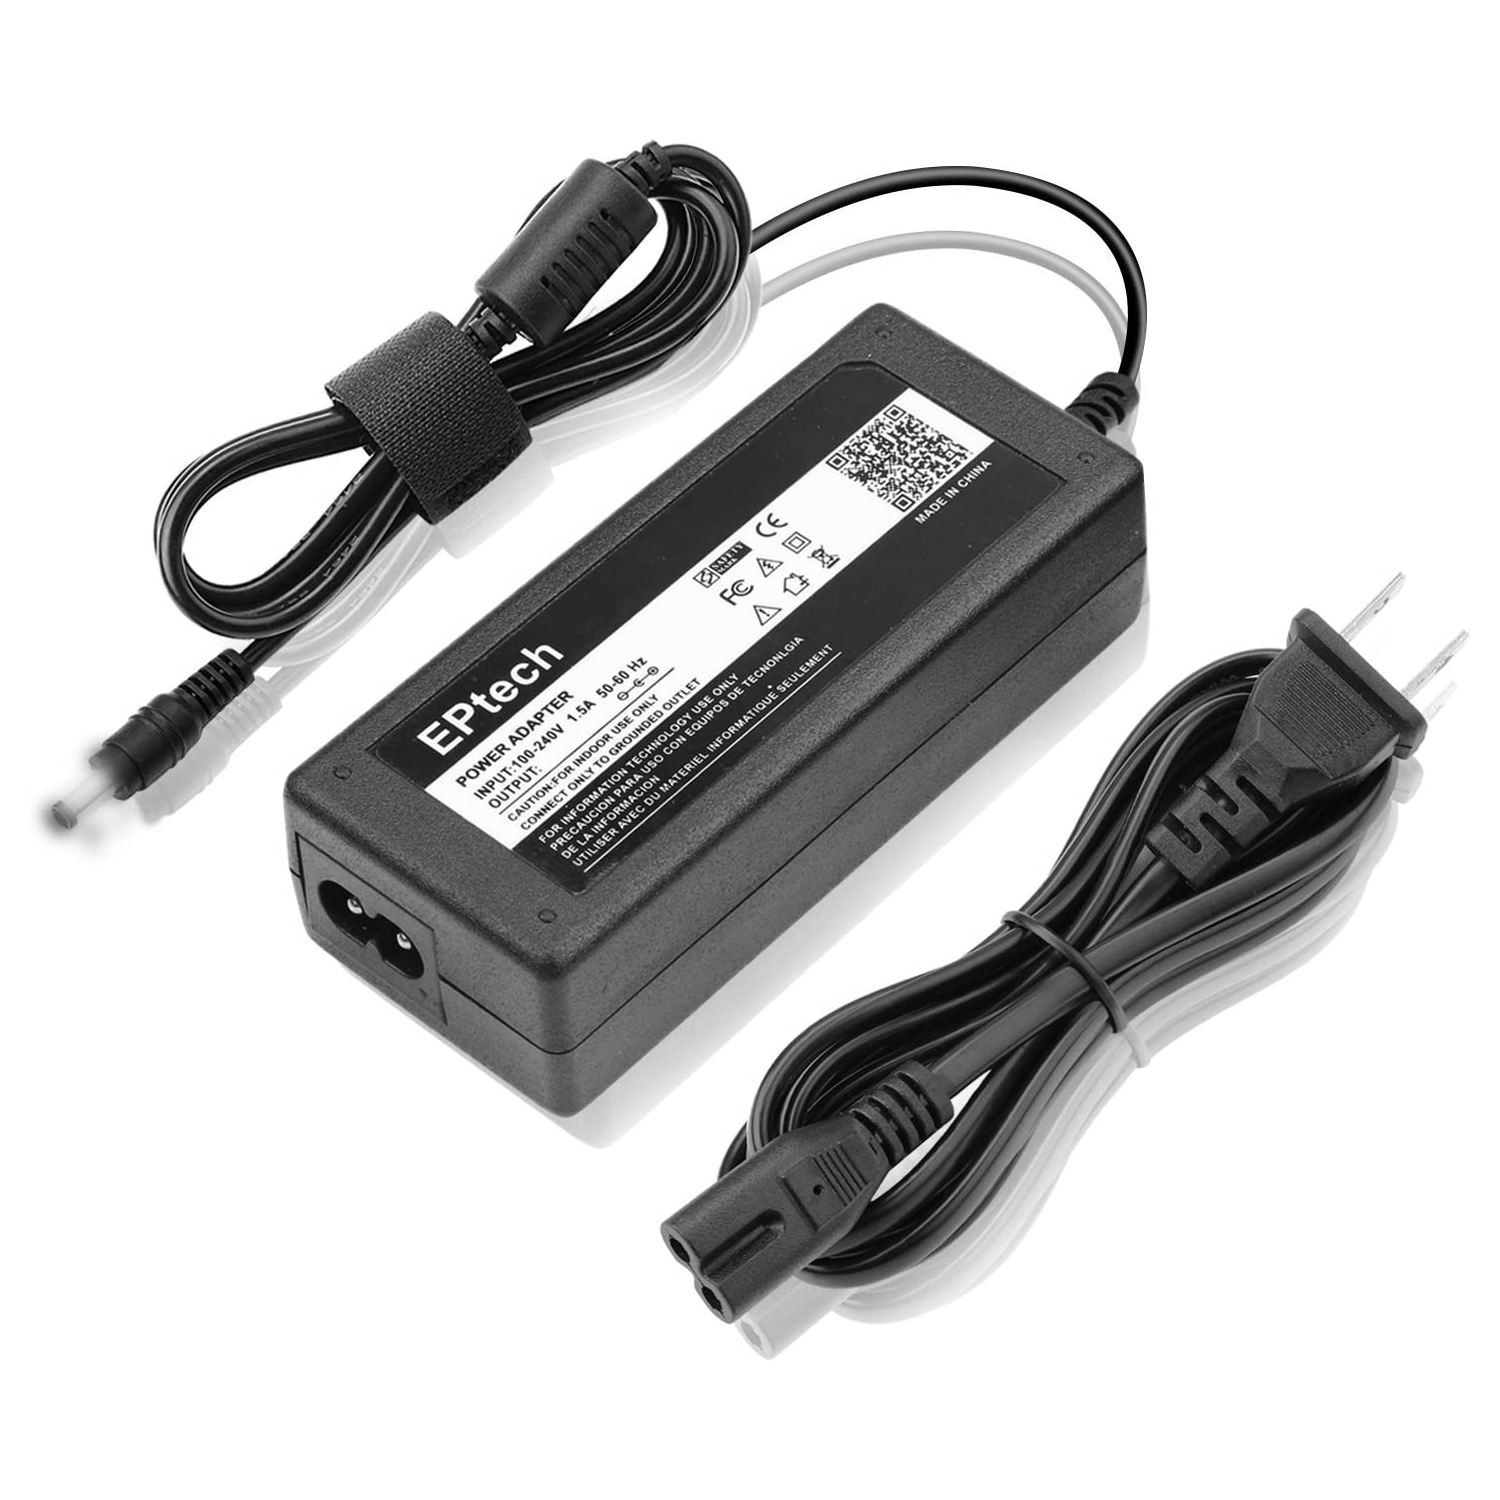 16V AC/DC Adapter Replacement For Yamaha PA-300 PA-301 PA-300B PA-300C P-120 S Pro P-120S MOTIF RACK Synthesizer ES PSR